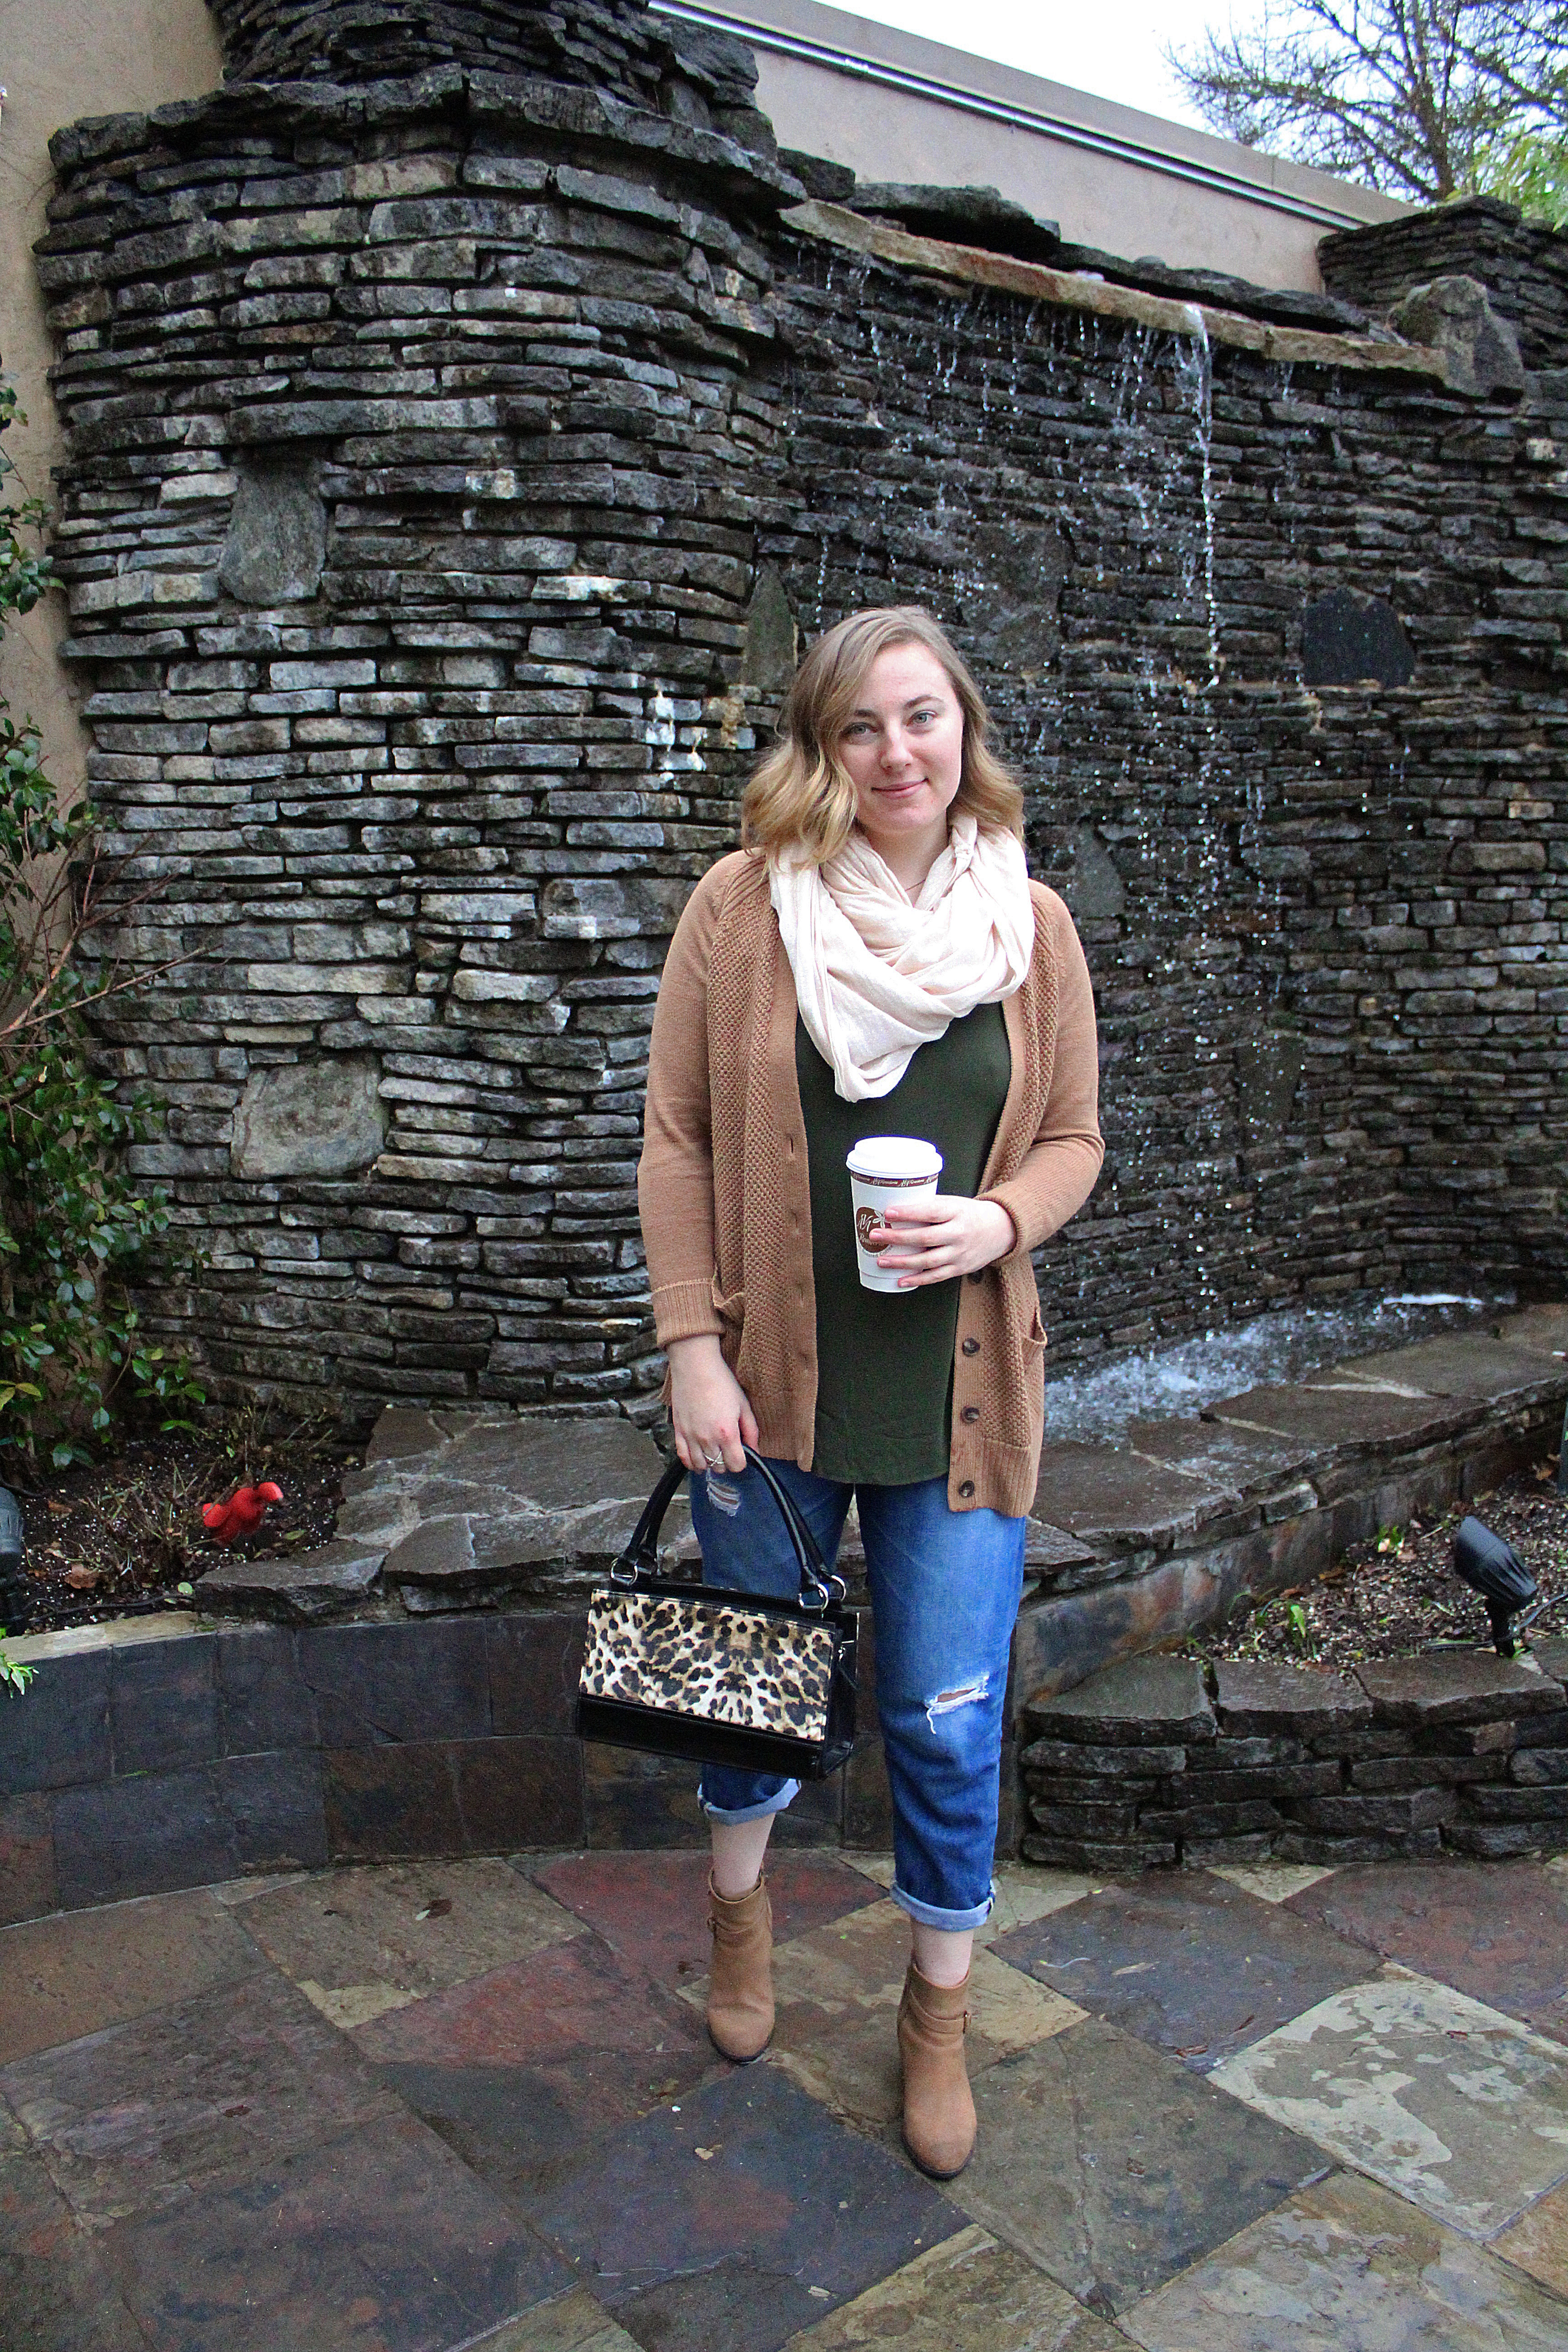 leopard print purse and a giveaway